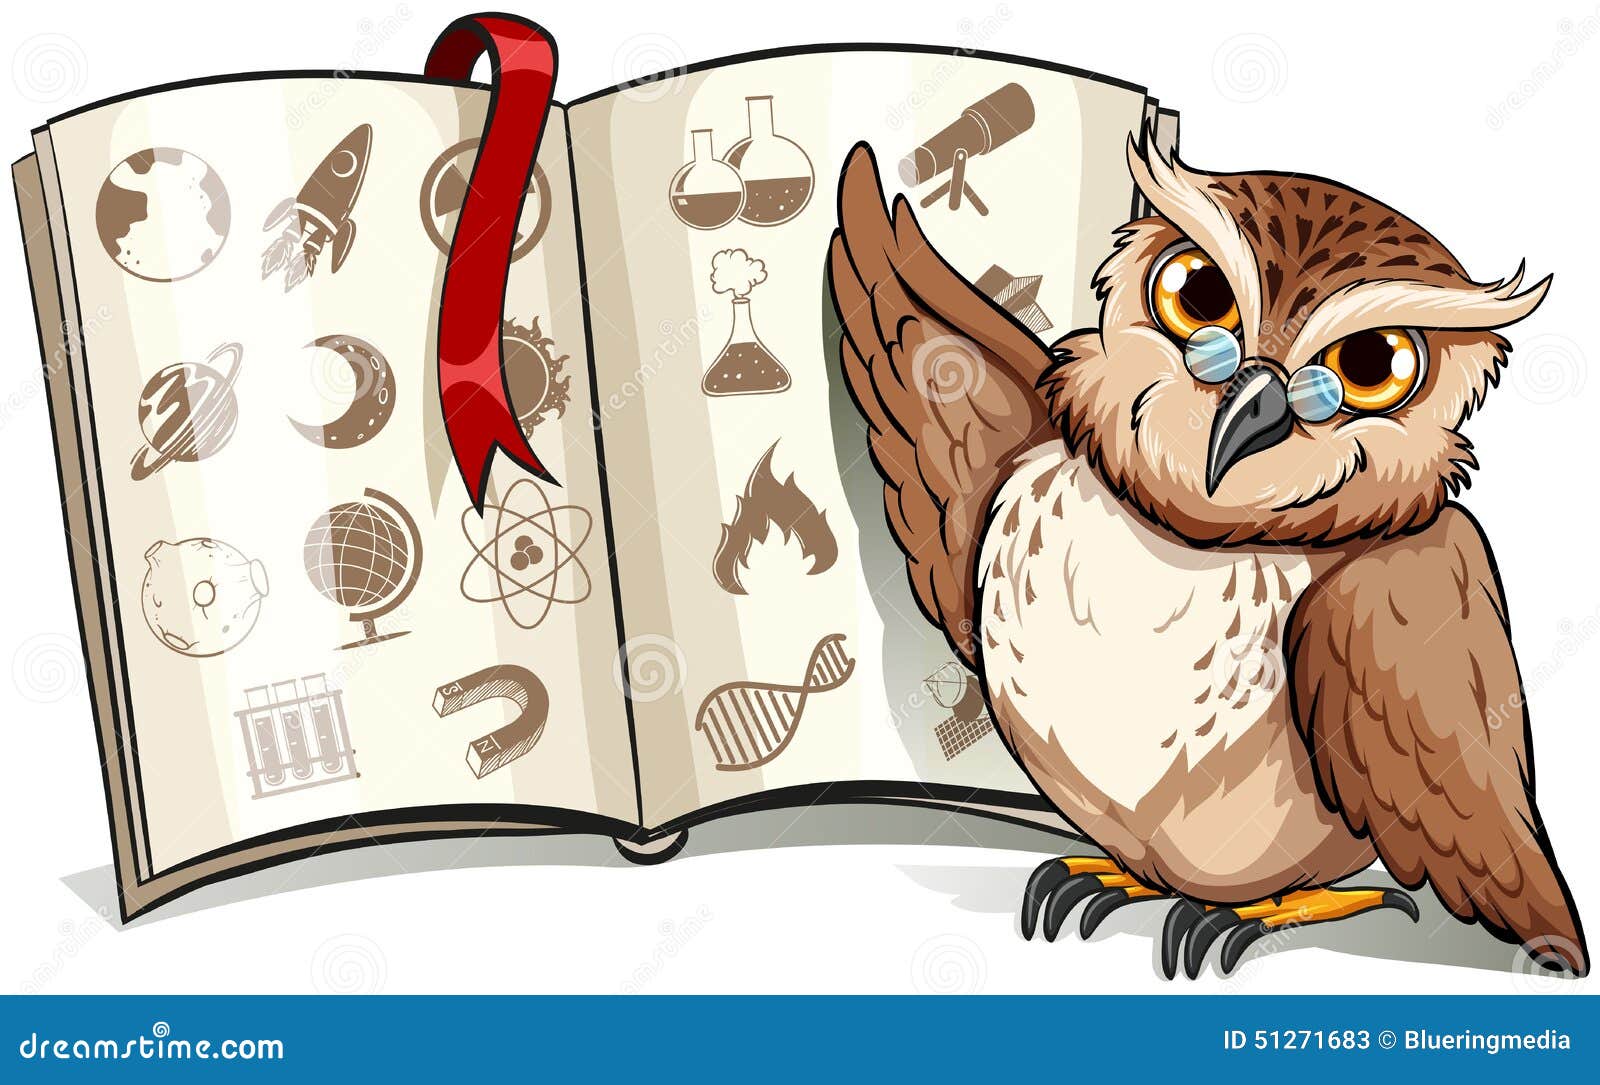 https://thumbs.dreamstime.com/z/owl-book-red-bookmark-white-background-51271683.jpg